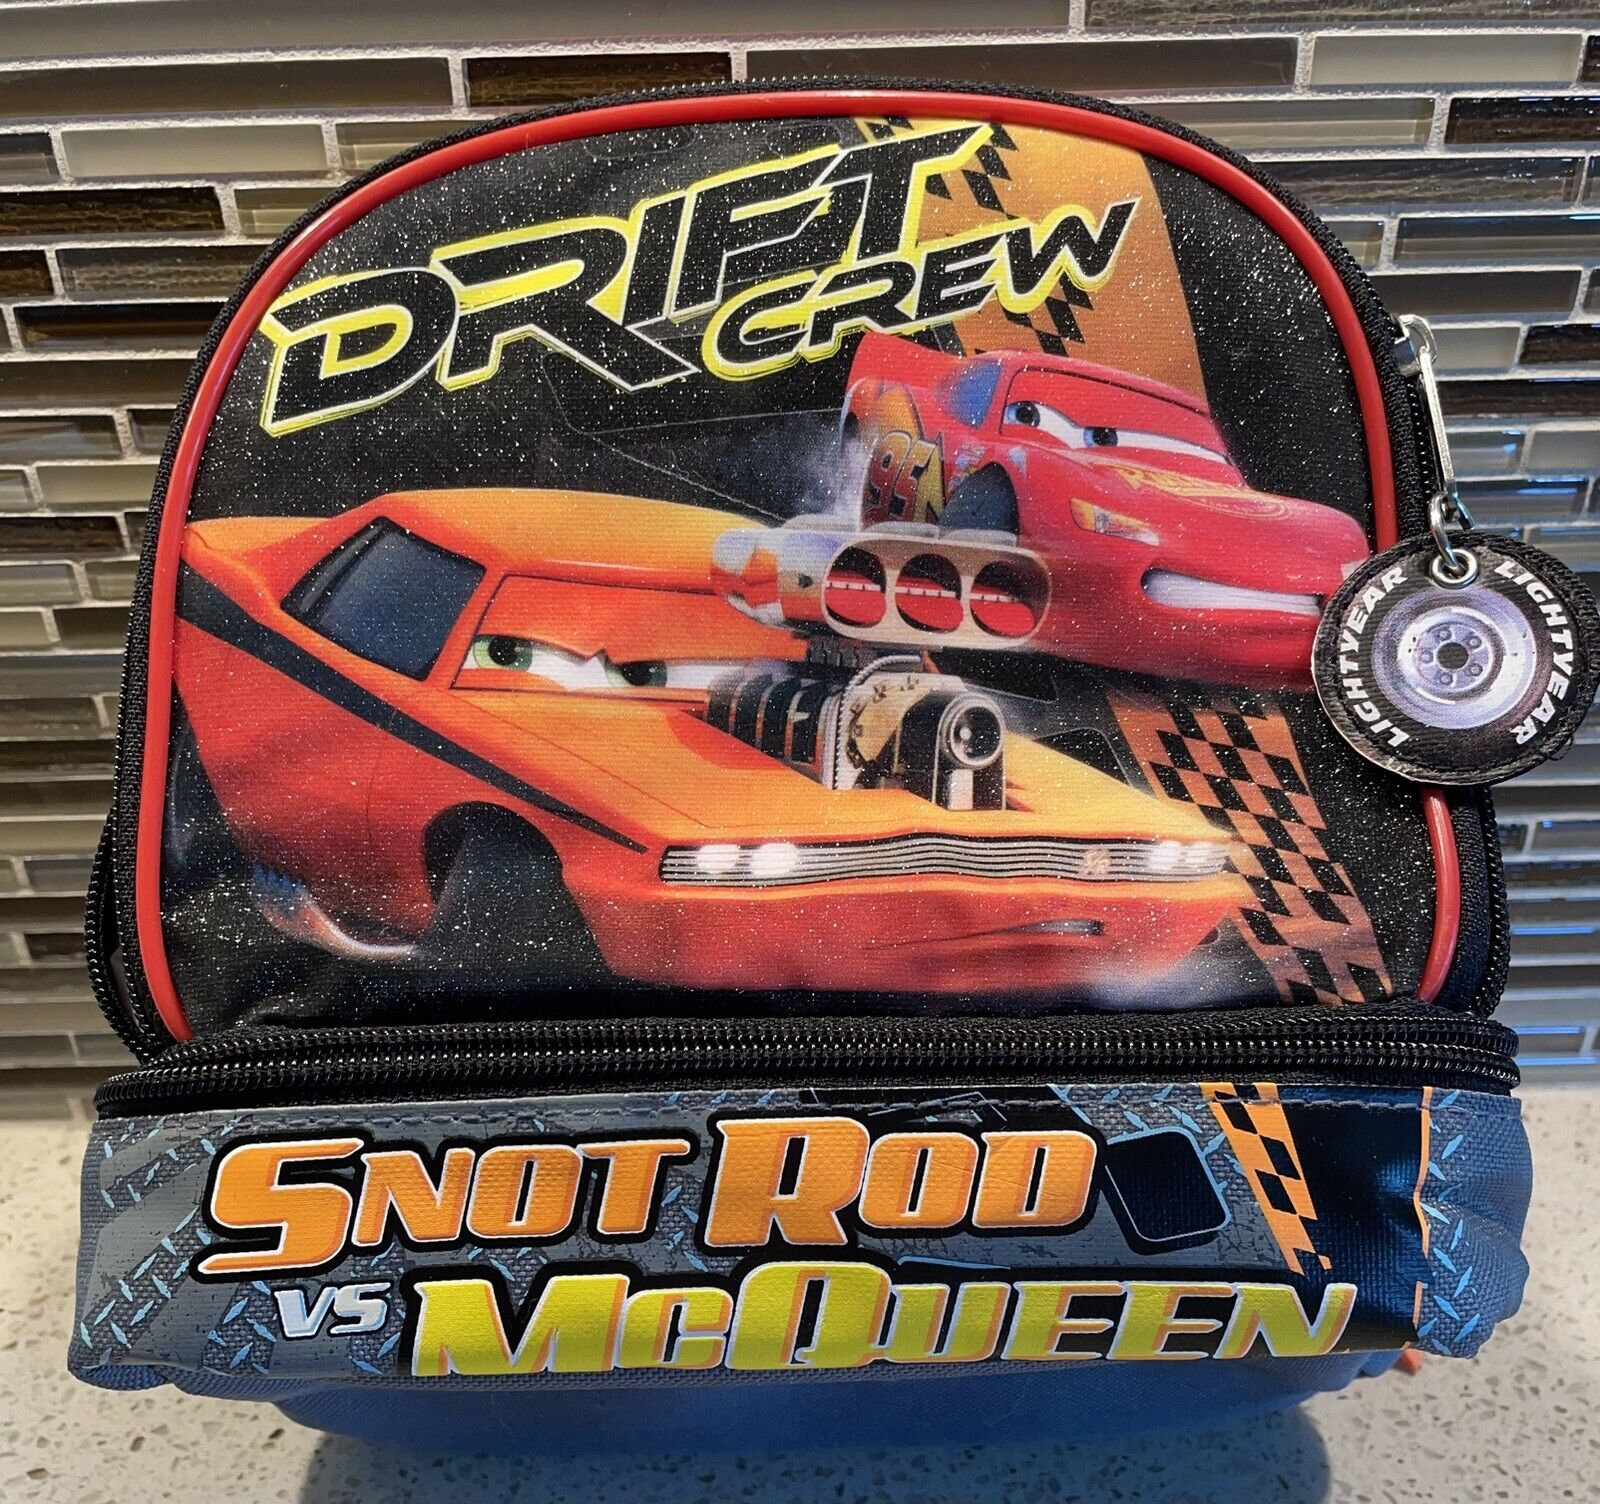 Disney Pixar Cars Drift Crew Snot Rod vs McQueen Soft Sided Insulated Lunch Box